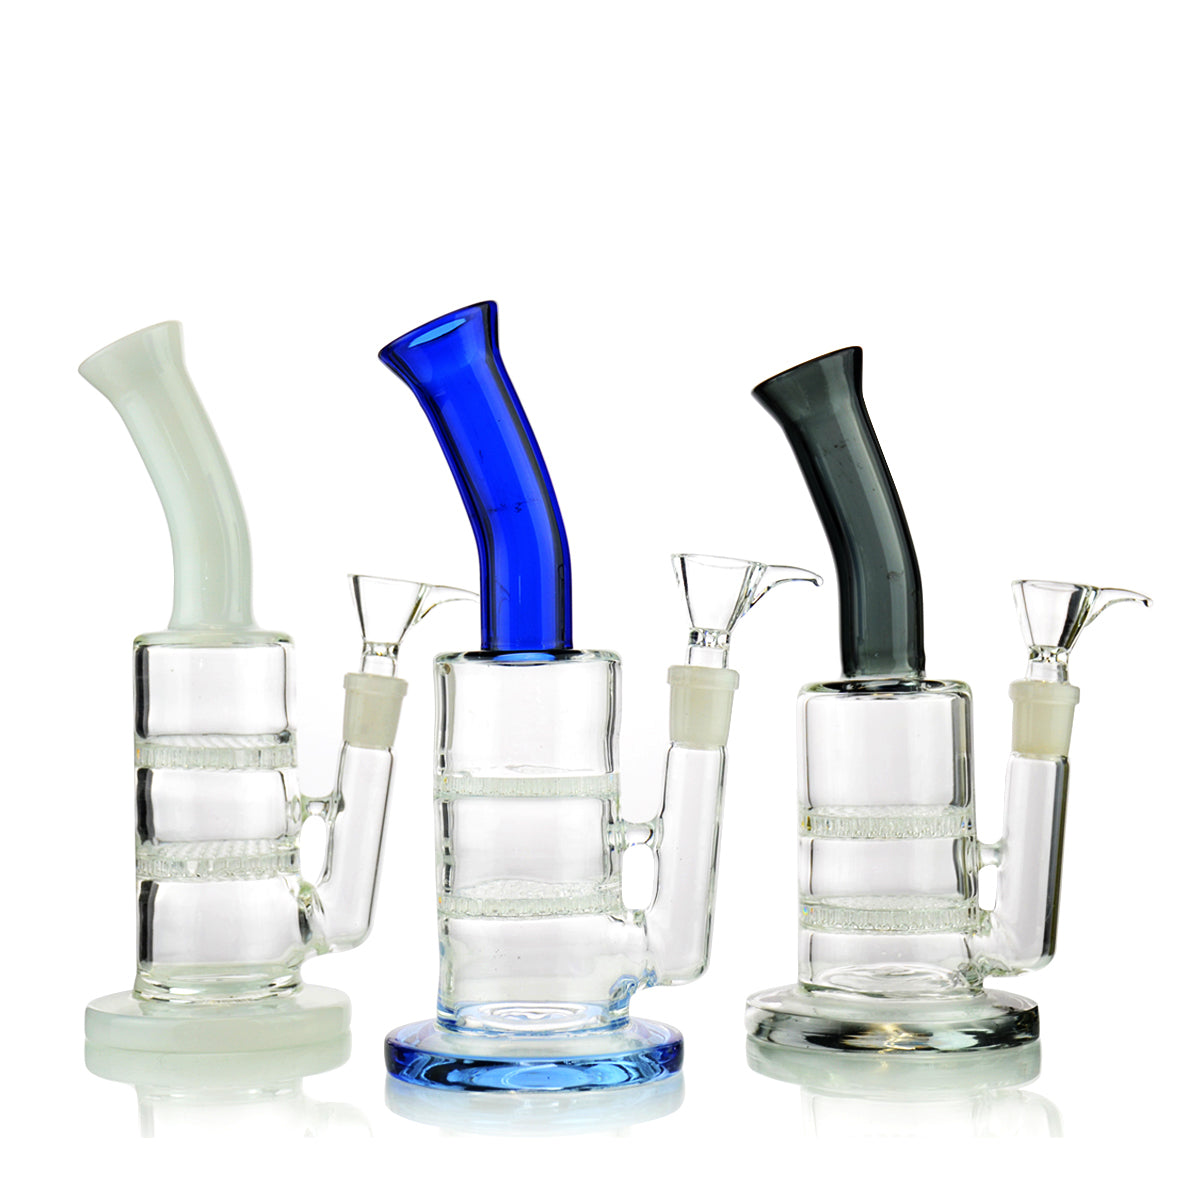 8'' Bong with Double Honeycomb Perc 14mm Male Bowl Included : NOTE- ONLY PINK AND BLUE COLORS AVAILAB